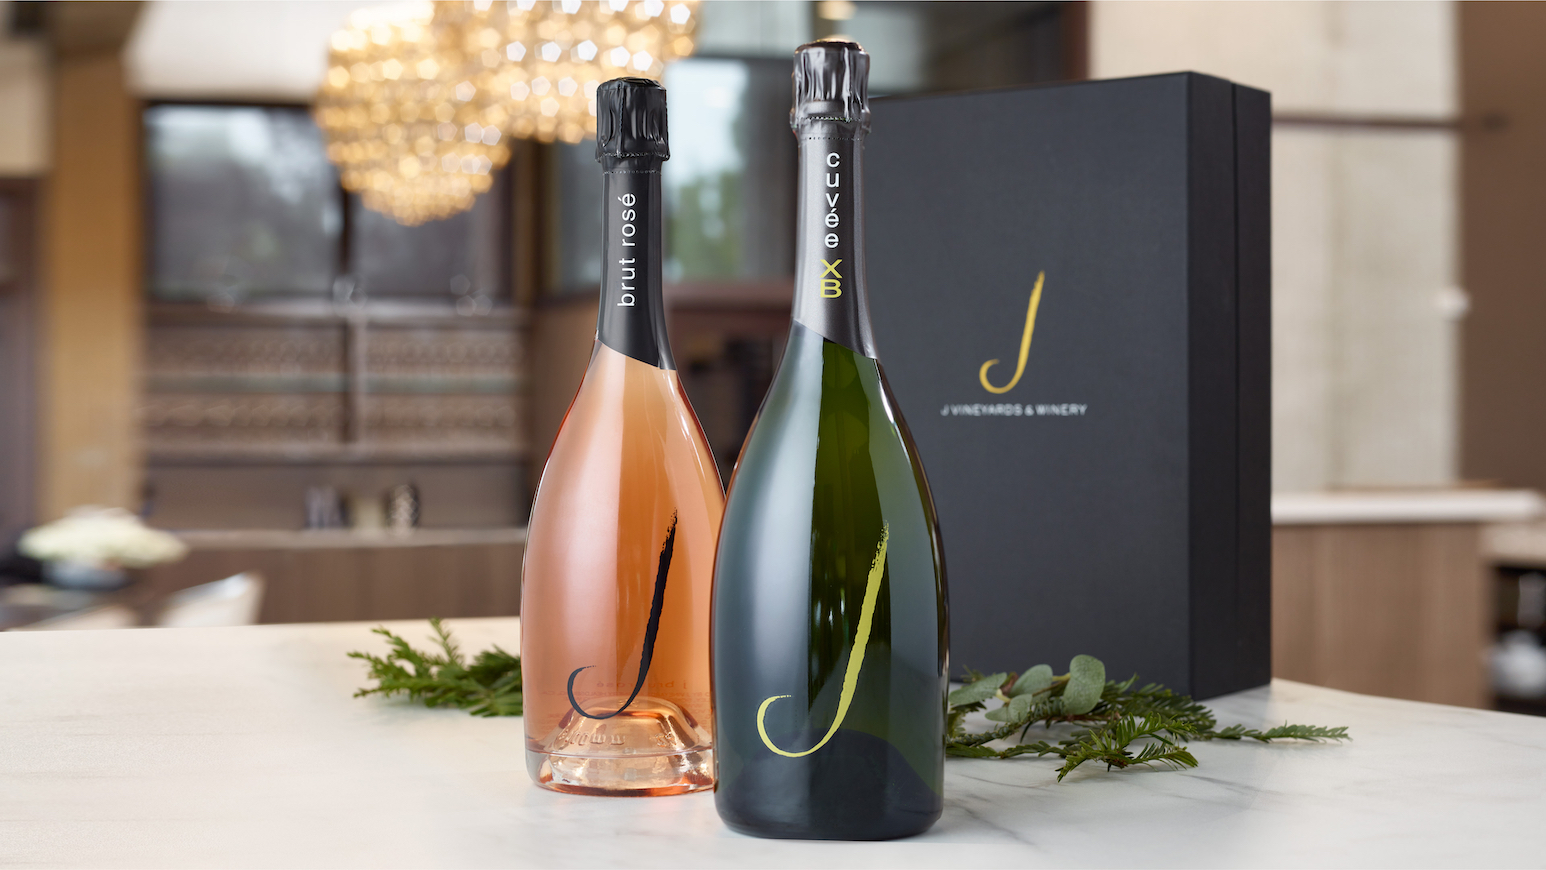 Gifts for wine lovers at J Vineyards and Winery